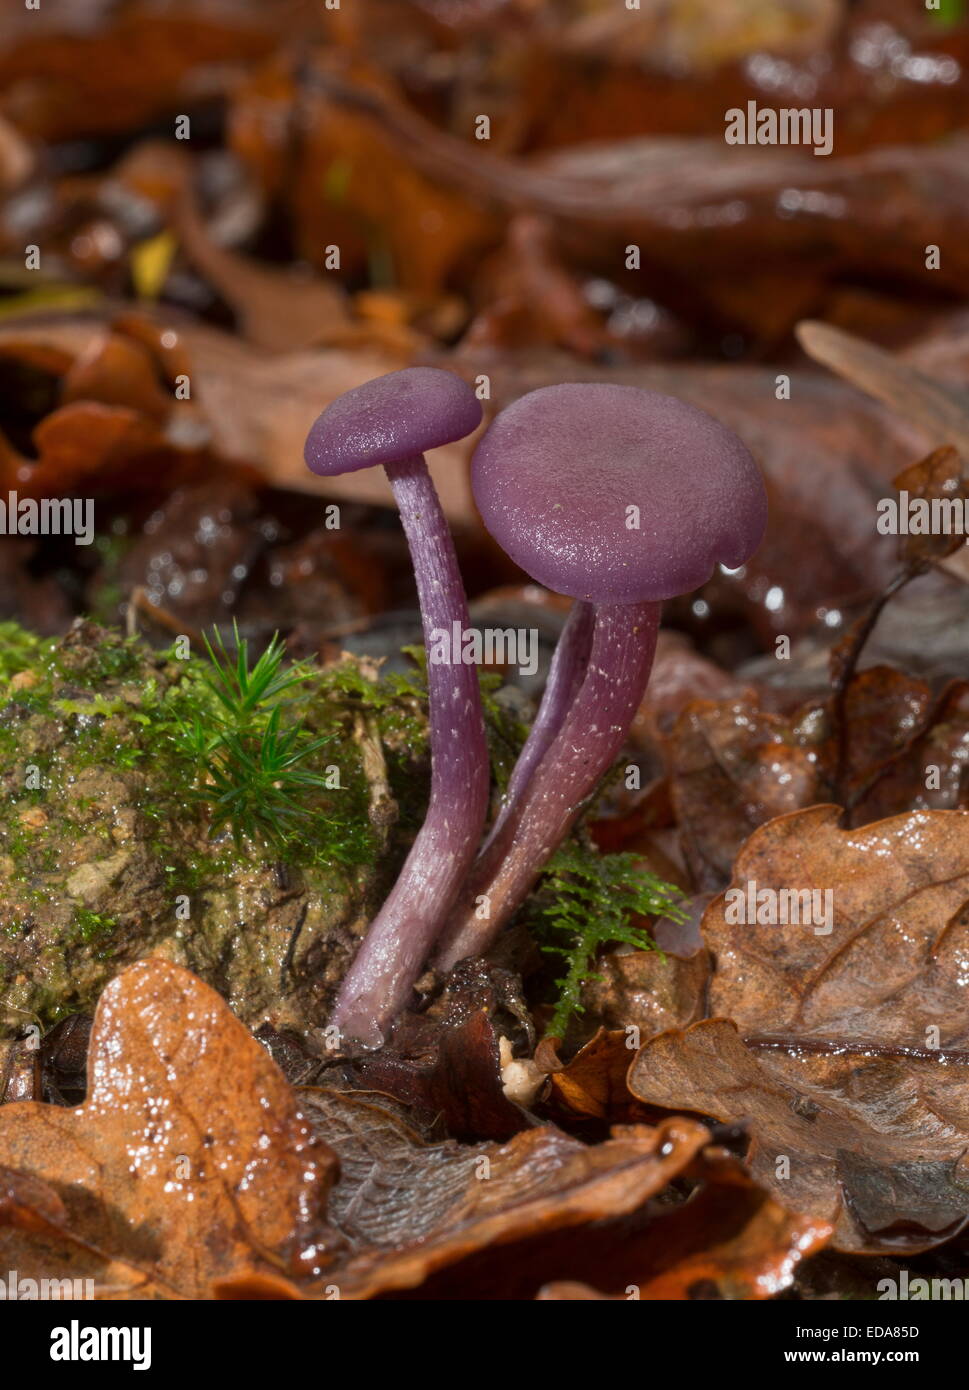 Clump of Amethyst Deceiver, Laccaria amethystina in shady woodland, Wilts. Stock Photo